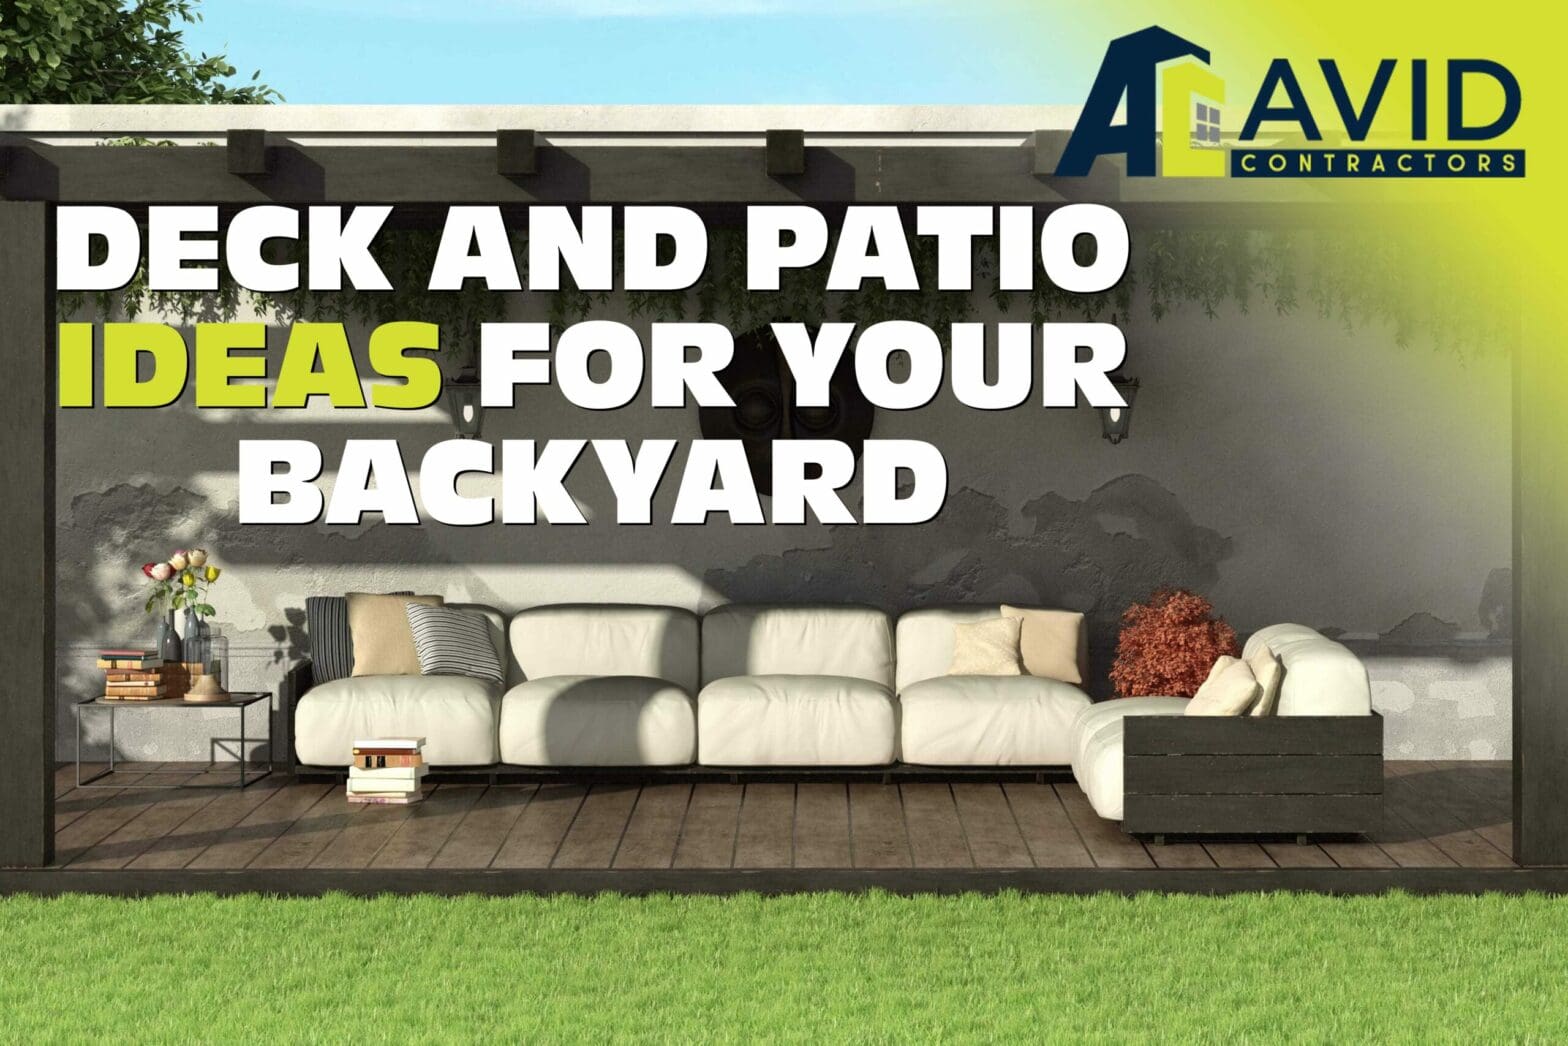 Deck and Patio Ideas For Your Backyard